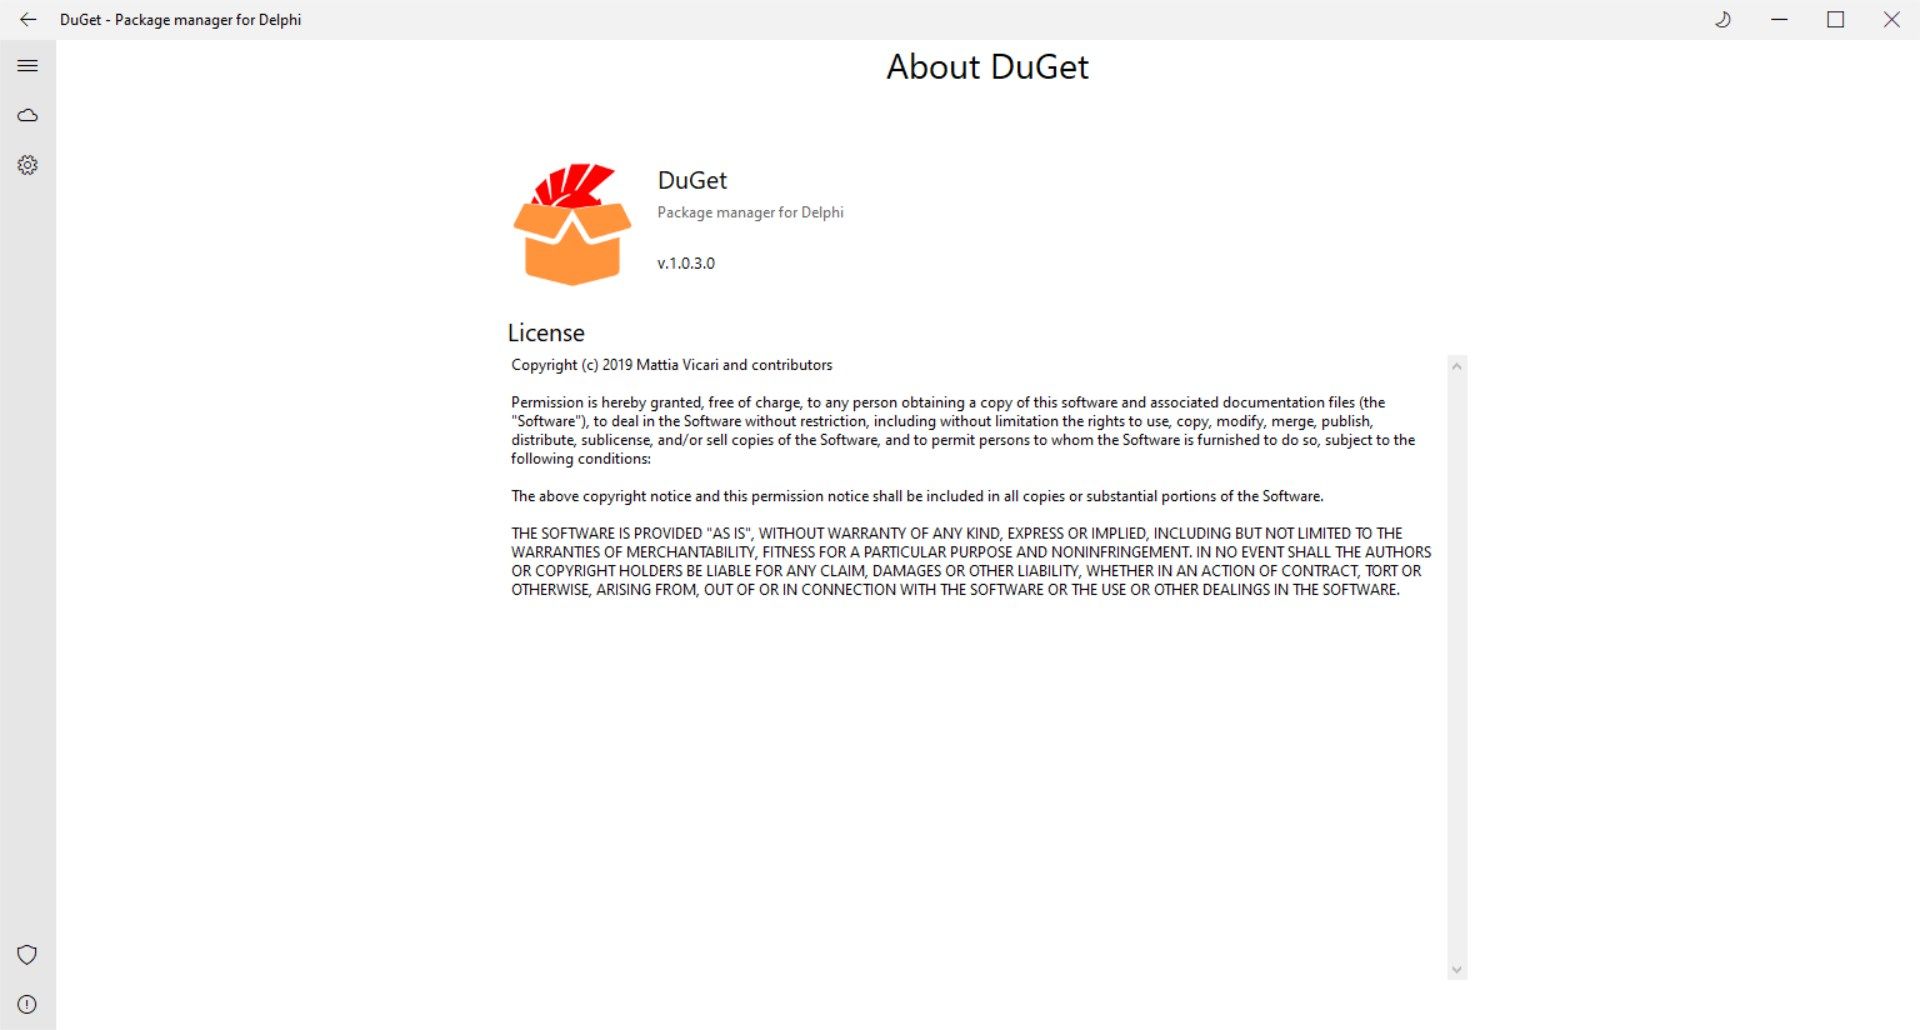 About DuGet